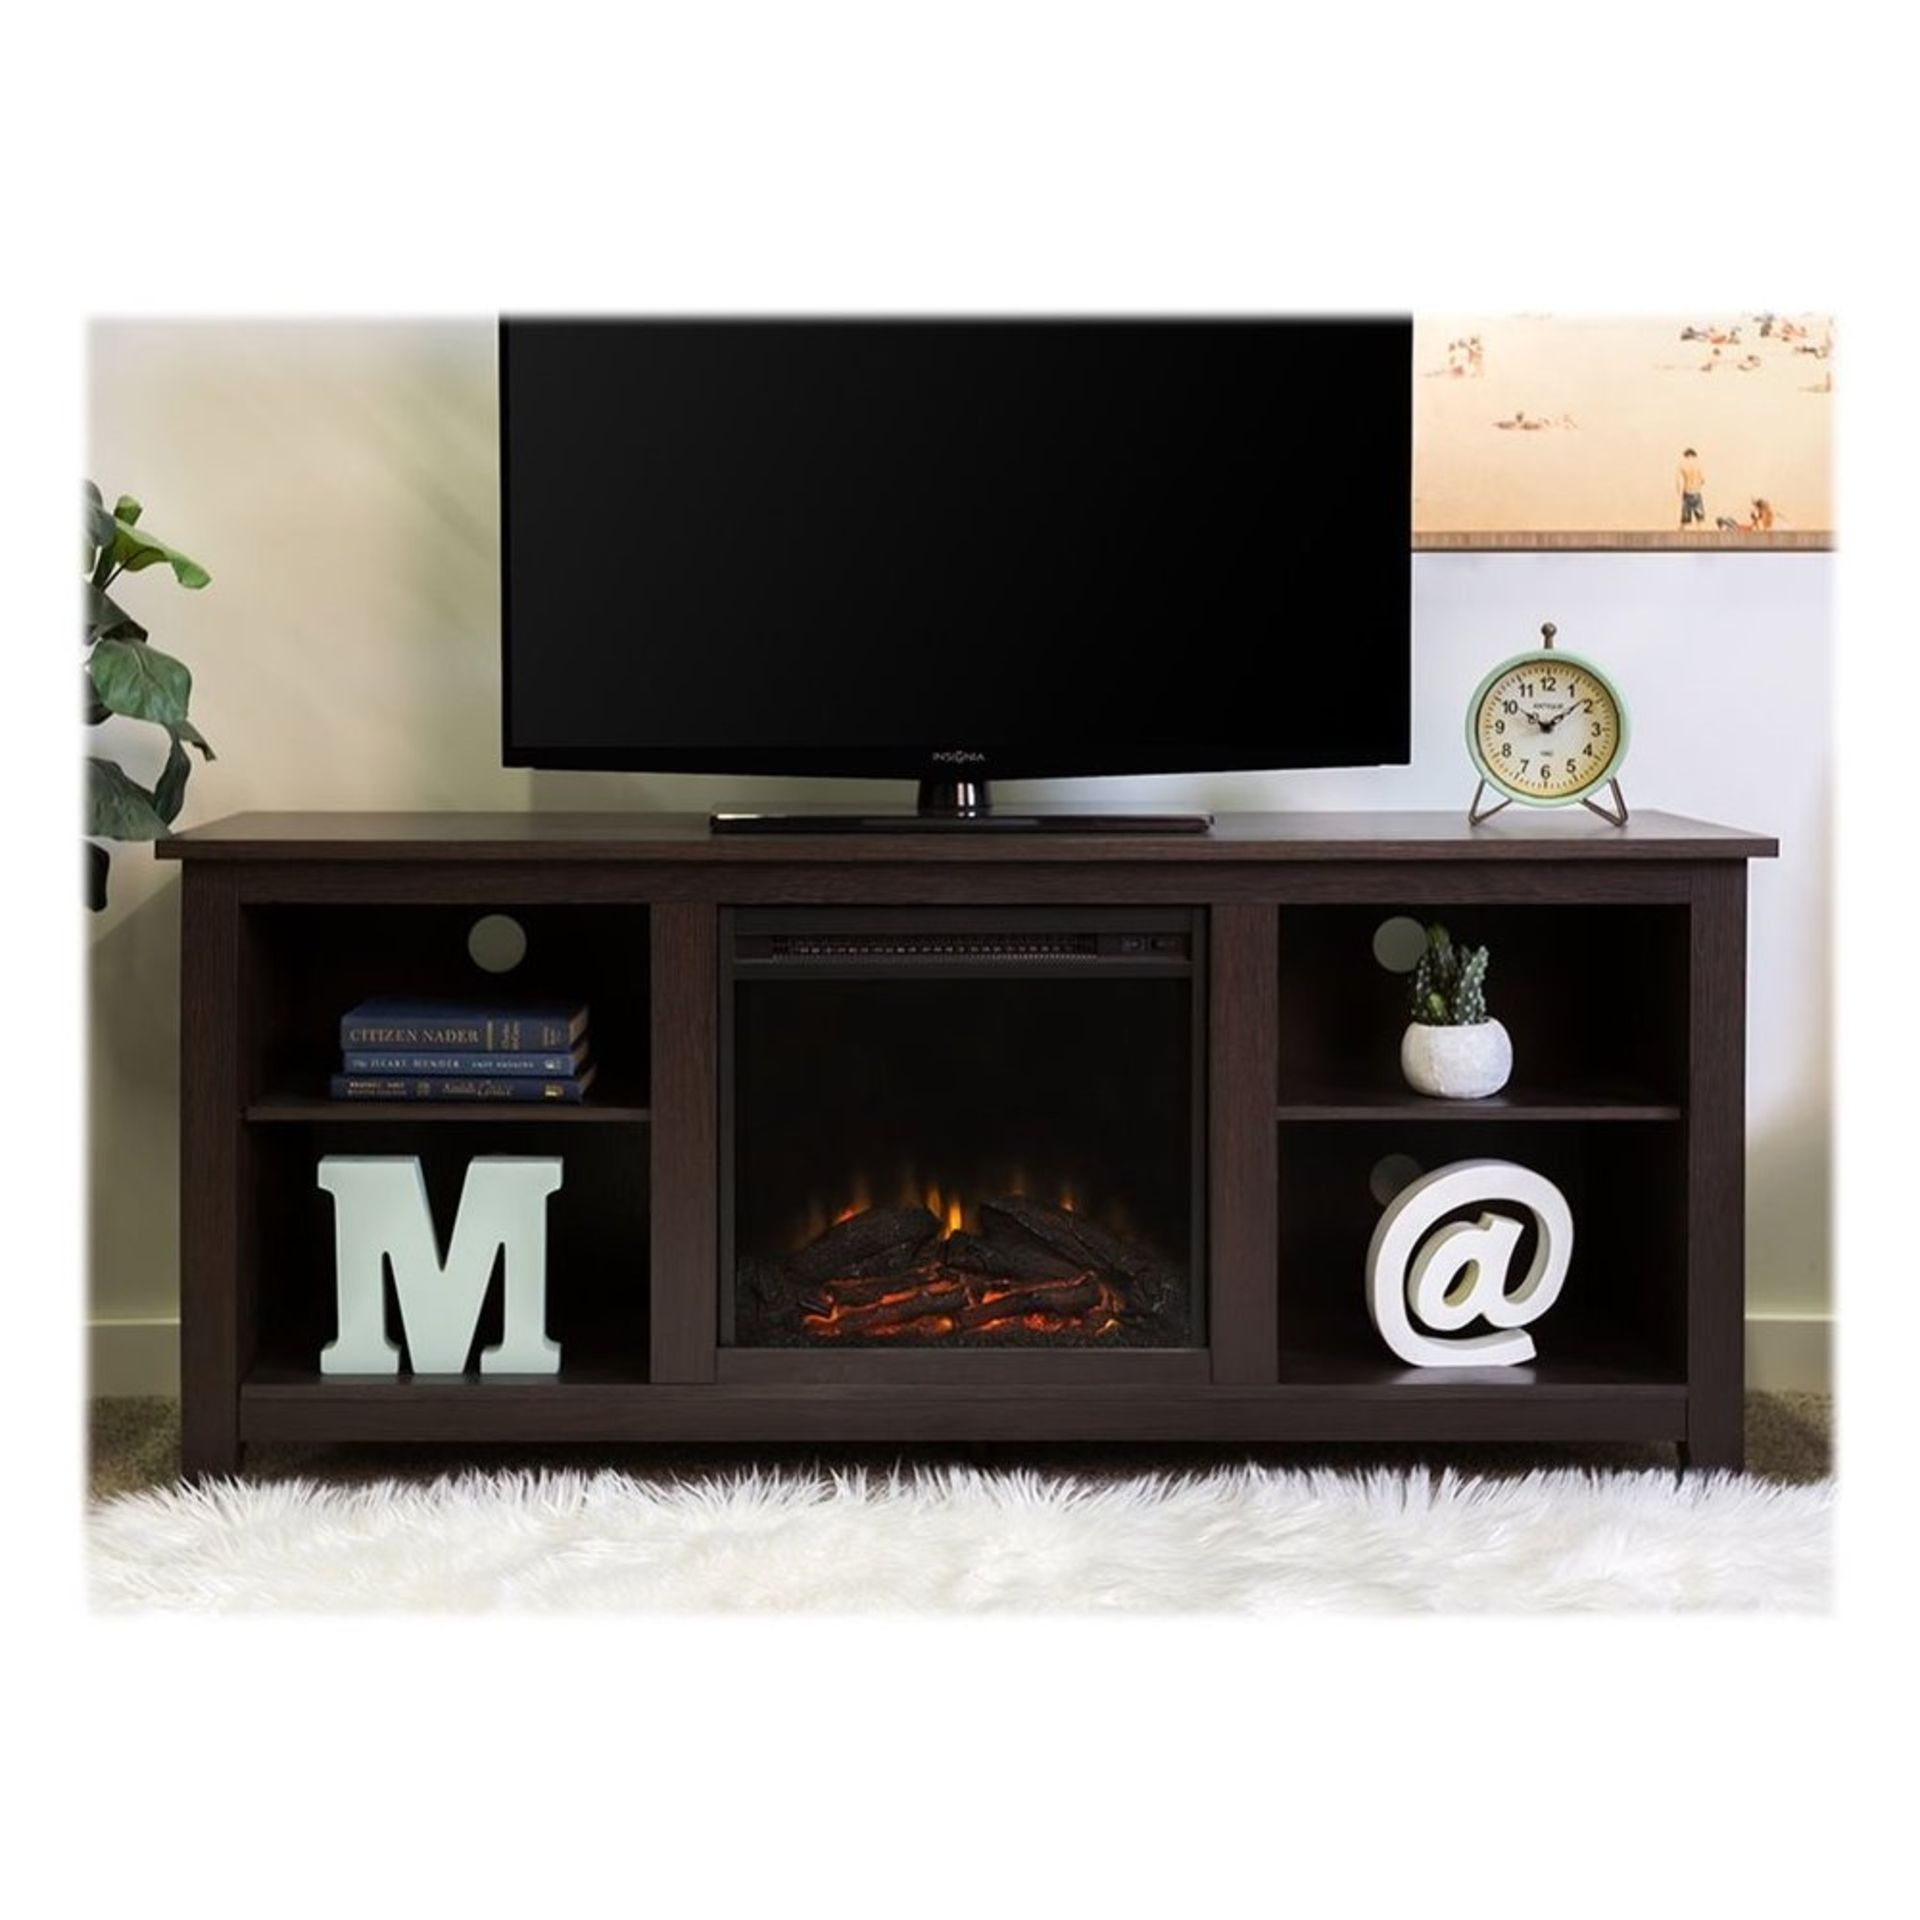 RUSTIC FARMHOUSE BROADUS FIREPLACE TV UNIT WITH ELECTRIC FIRE IN ESPRESSO - RRP £568